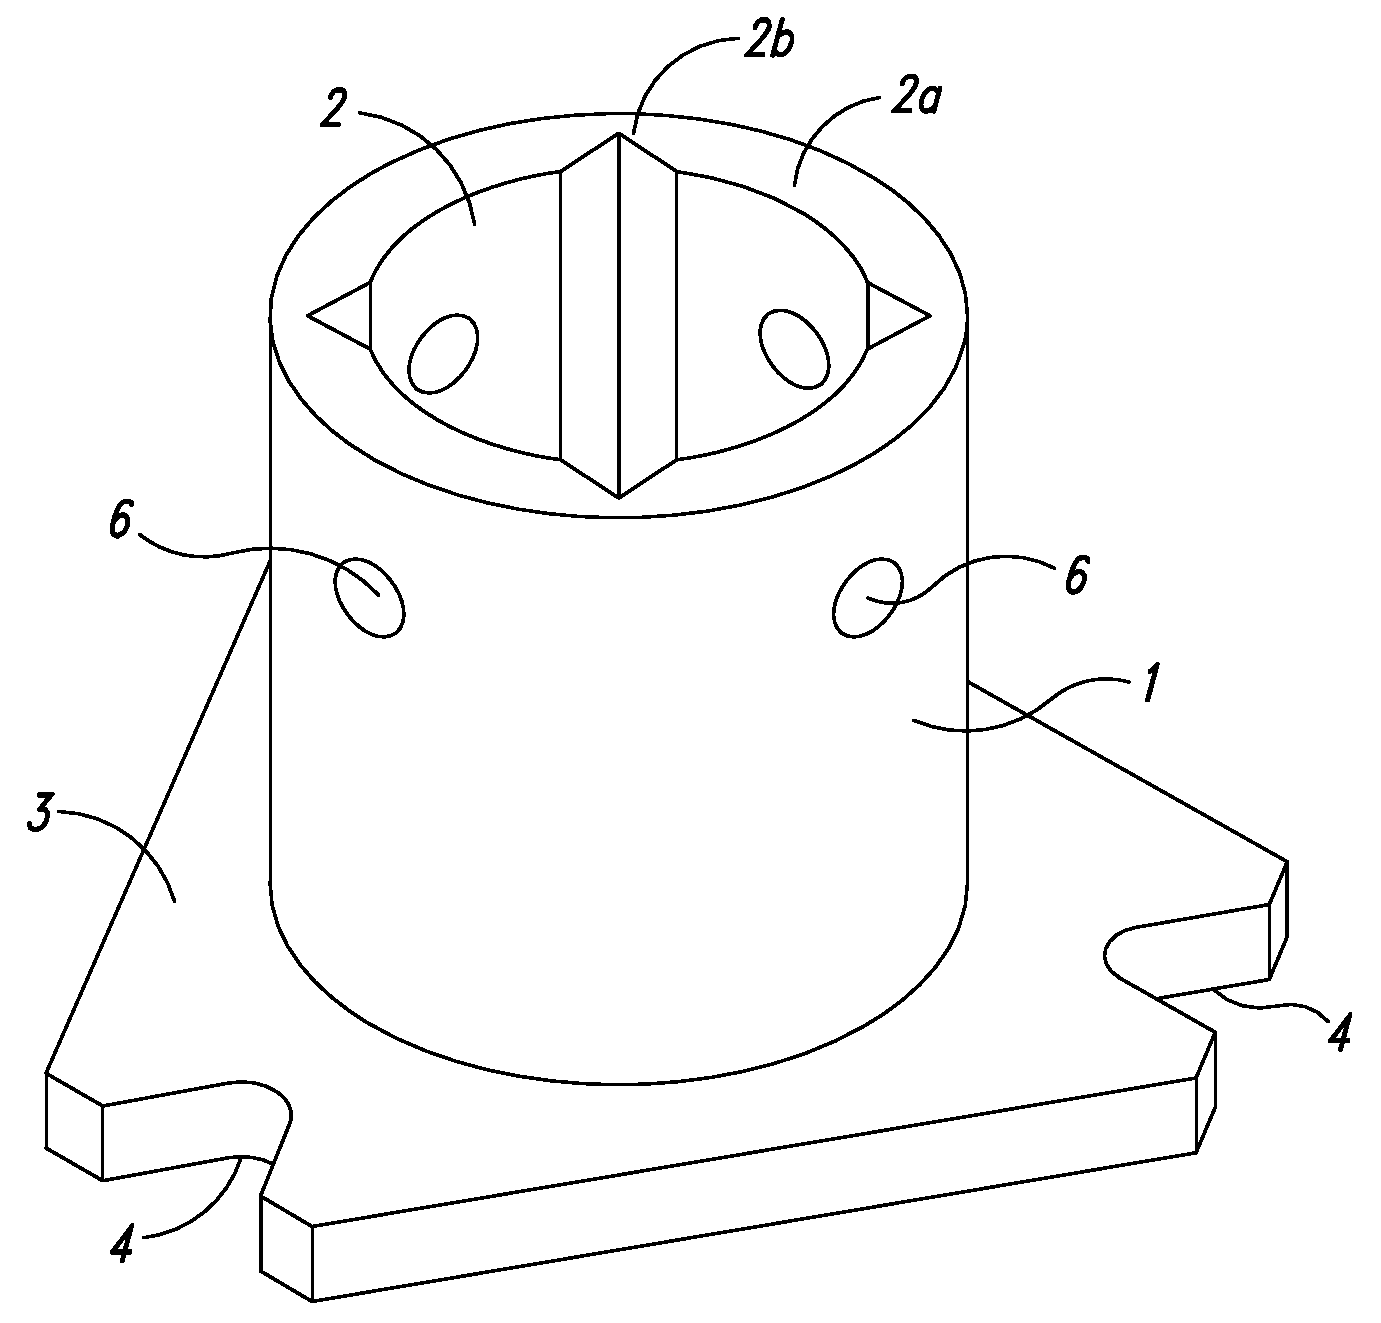 Flanged base and breakaway system connector for road accessory posts